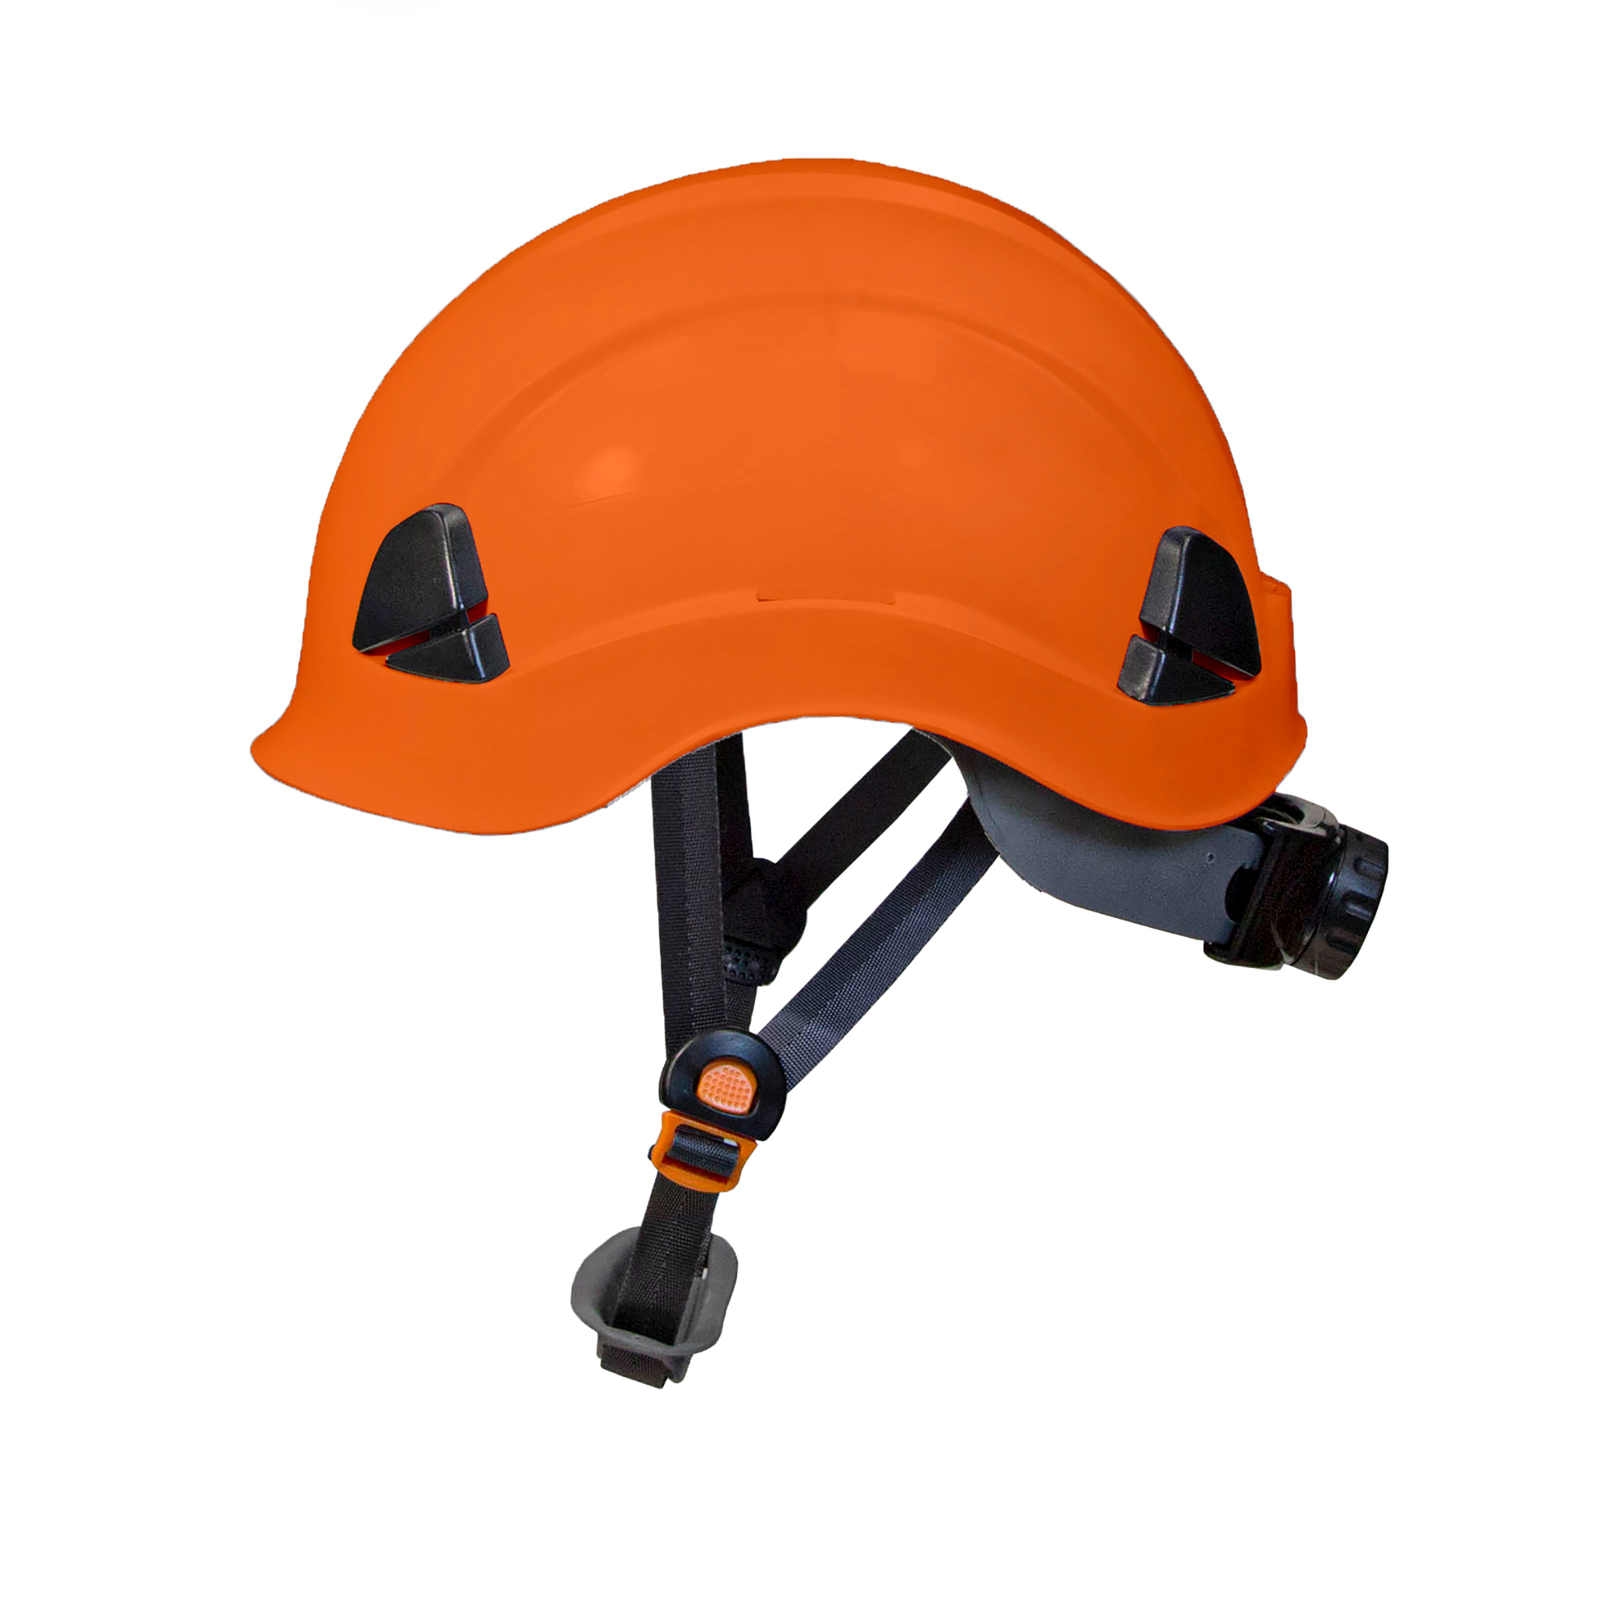 Side view of the Jorestech orange mountable helmet without the attachments